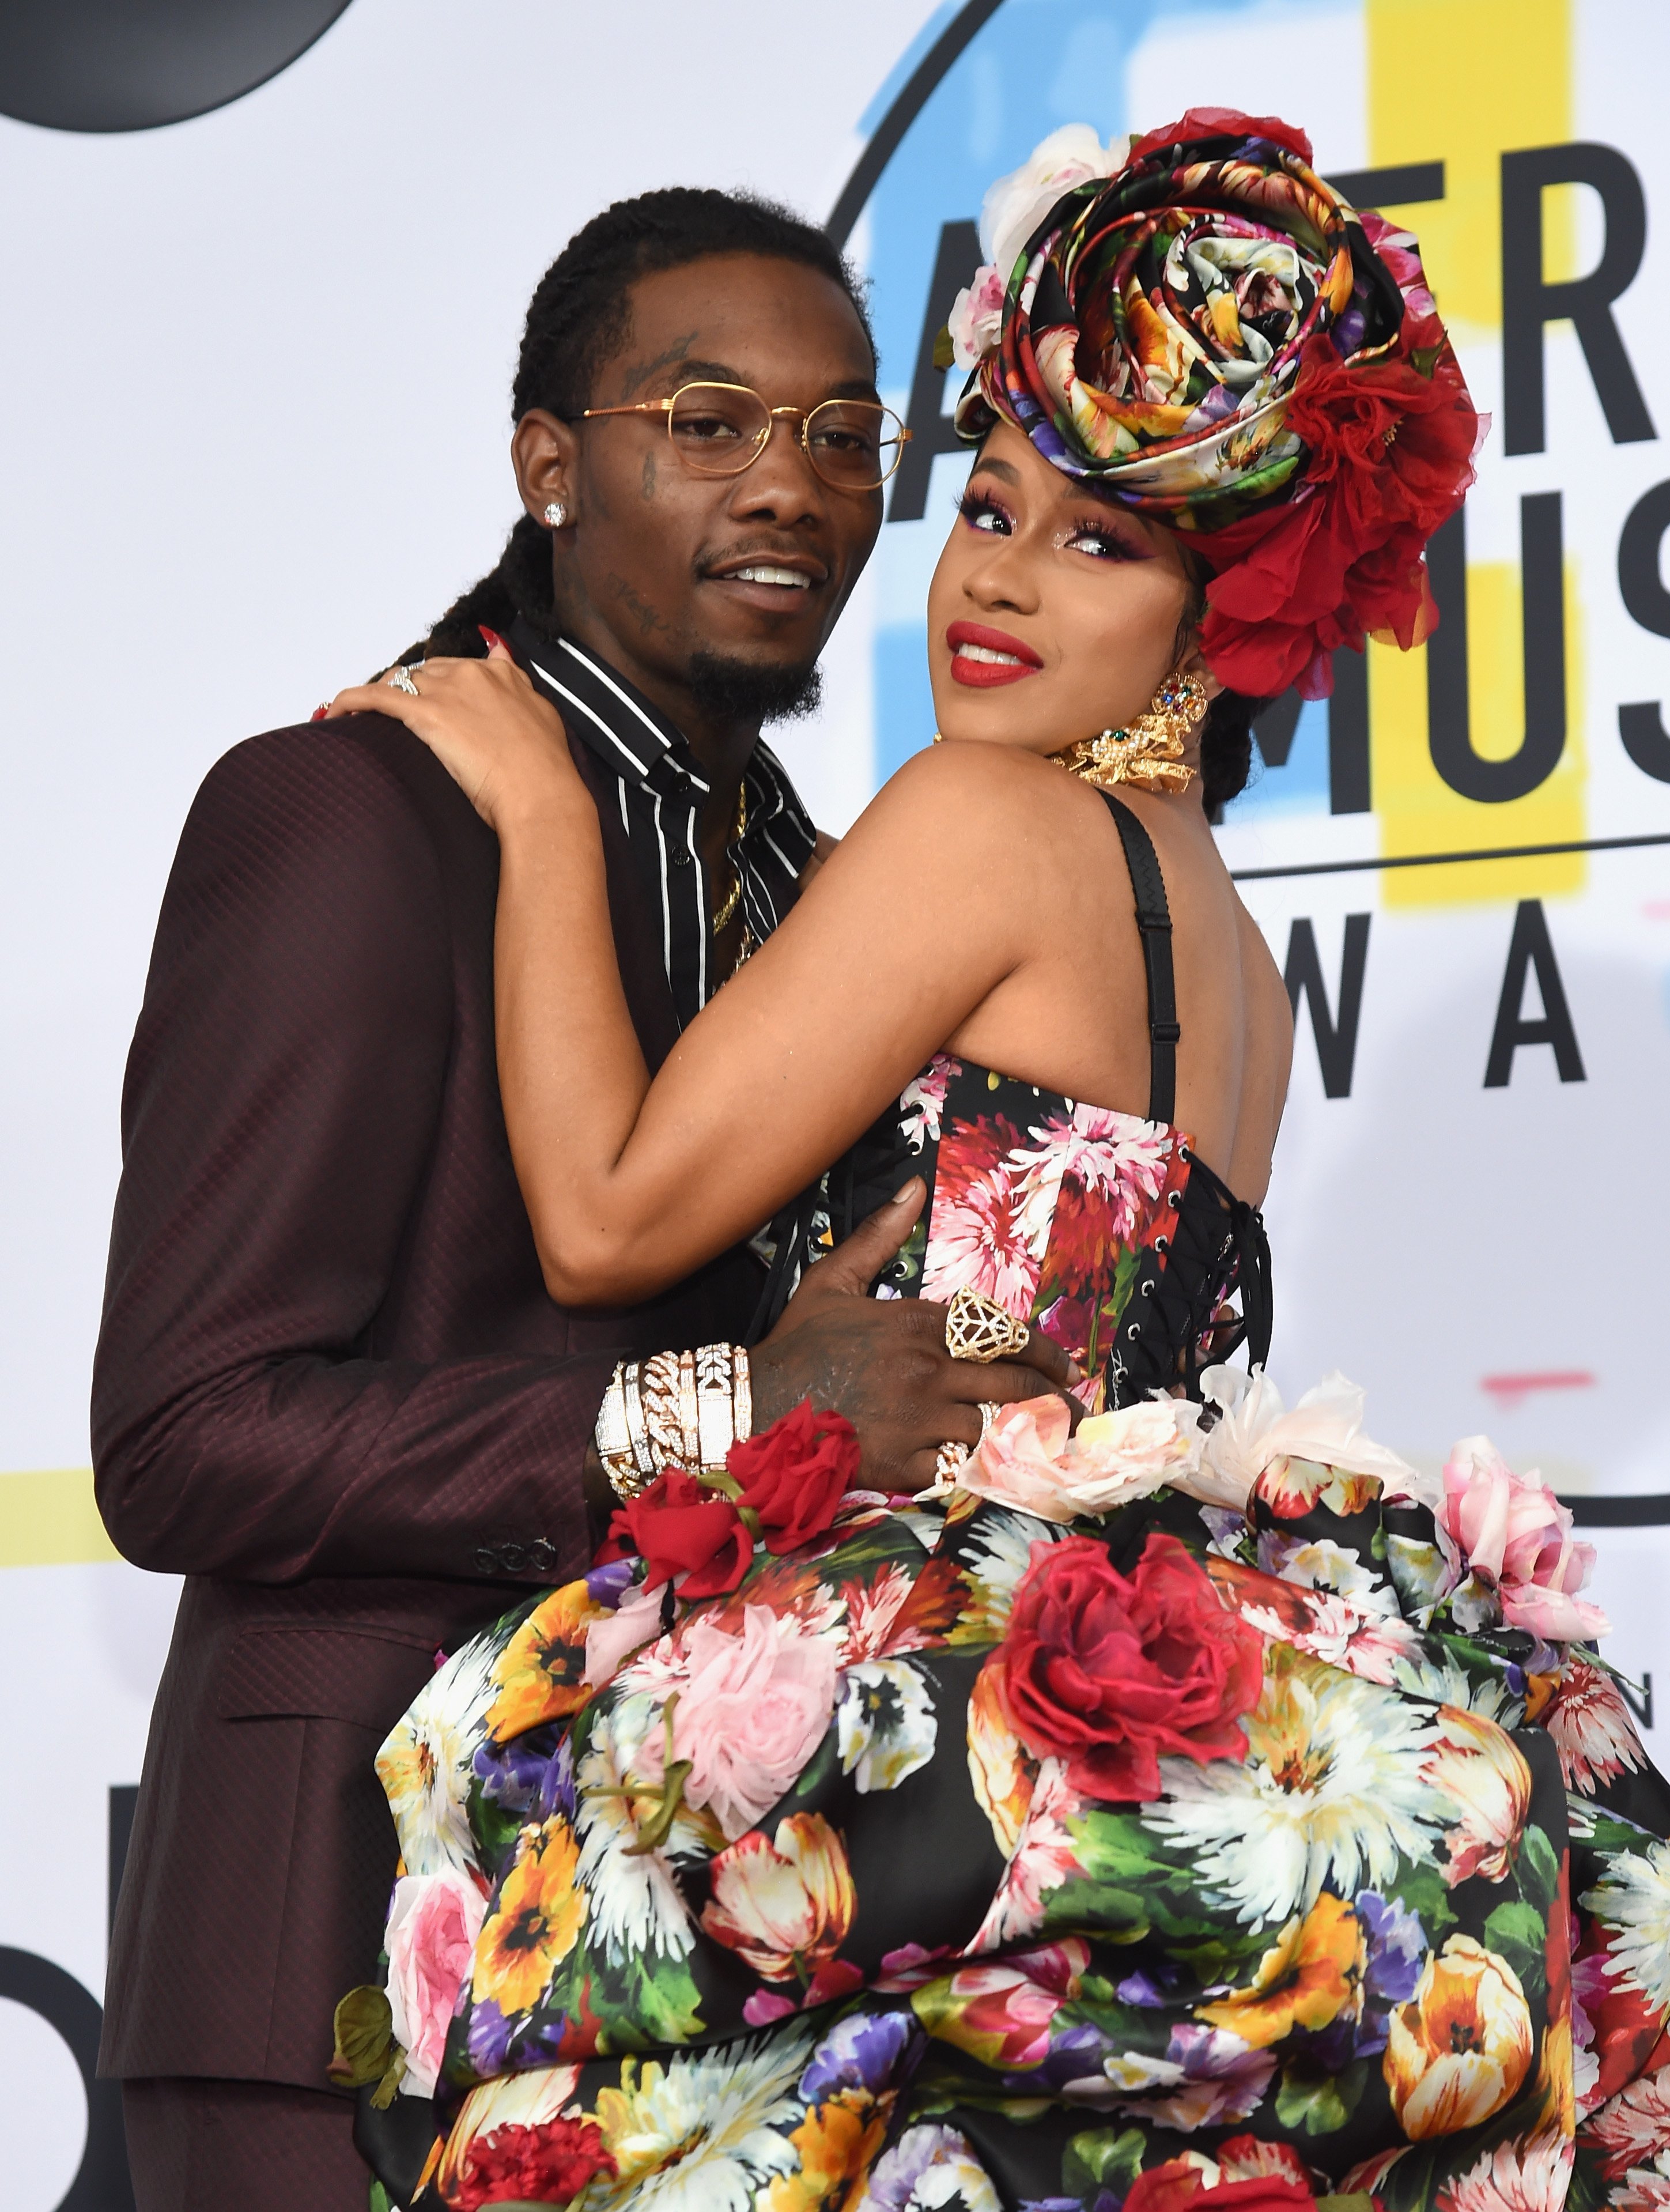 Offset (L) and Cardi B attend the 2018 American Music Awards at Microsoft Theater on October 9, 2018 in Los Angeles, California. | Photo: Getty Images